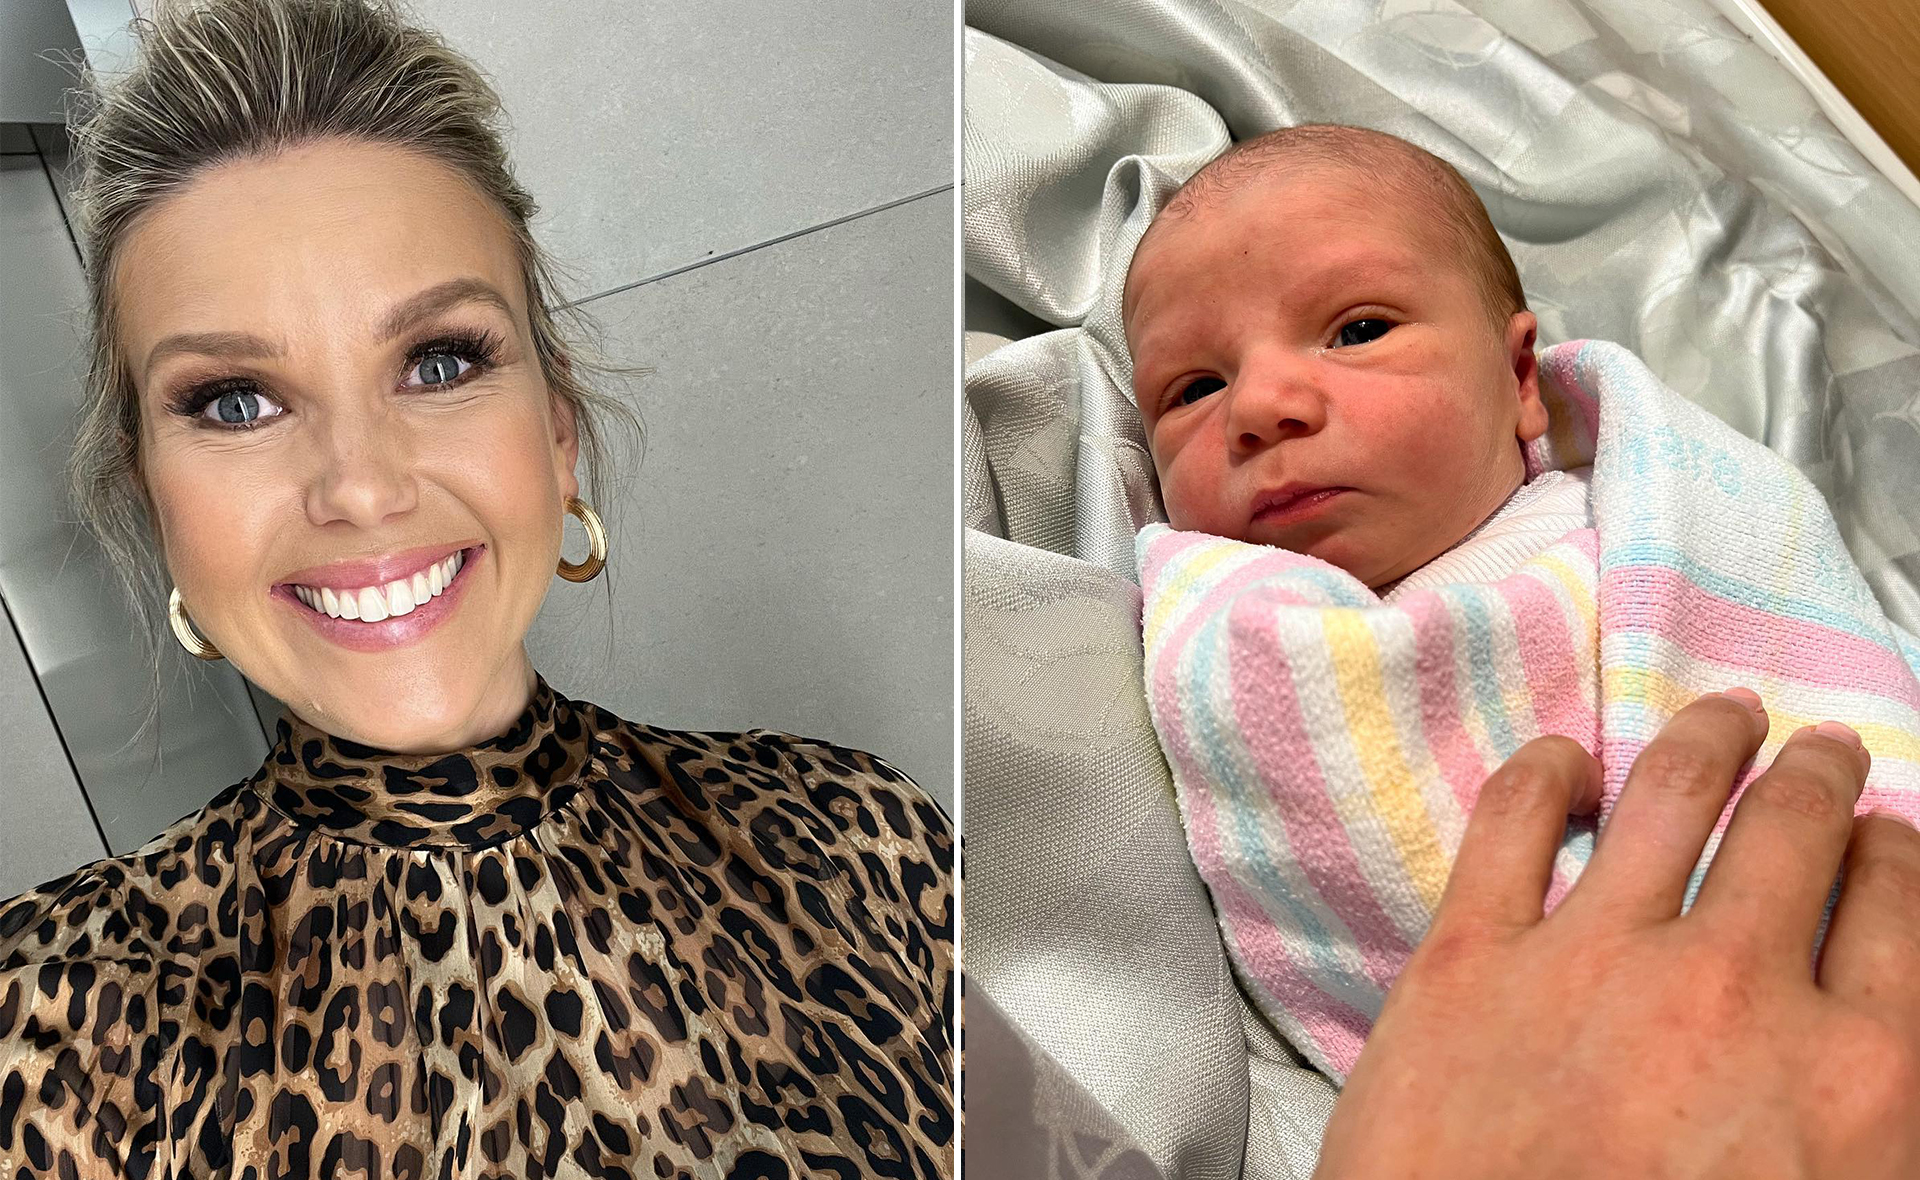 And baby makes four! Edwina Bartholomew and husband Neil Varcoe welcome their second child into the world